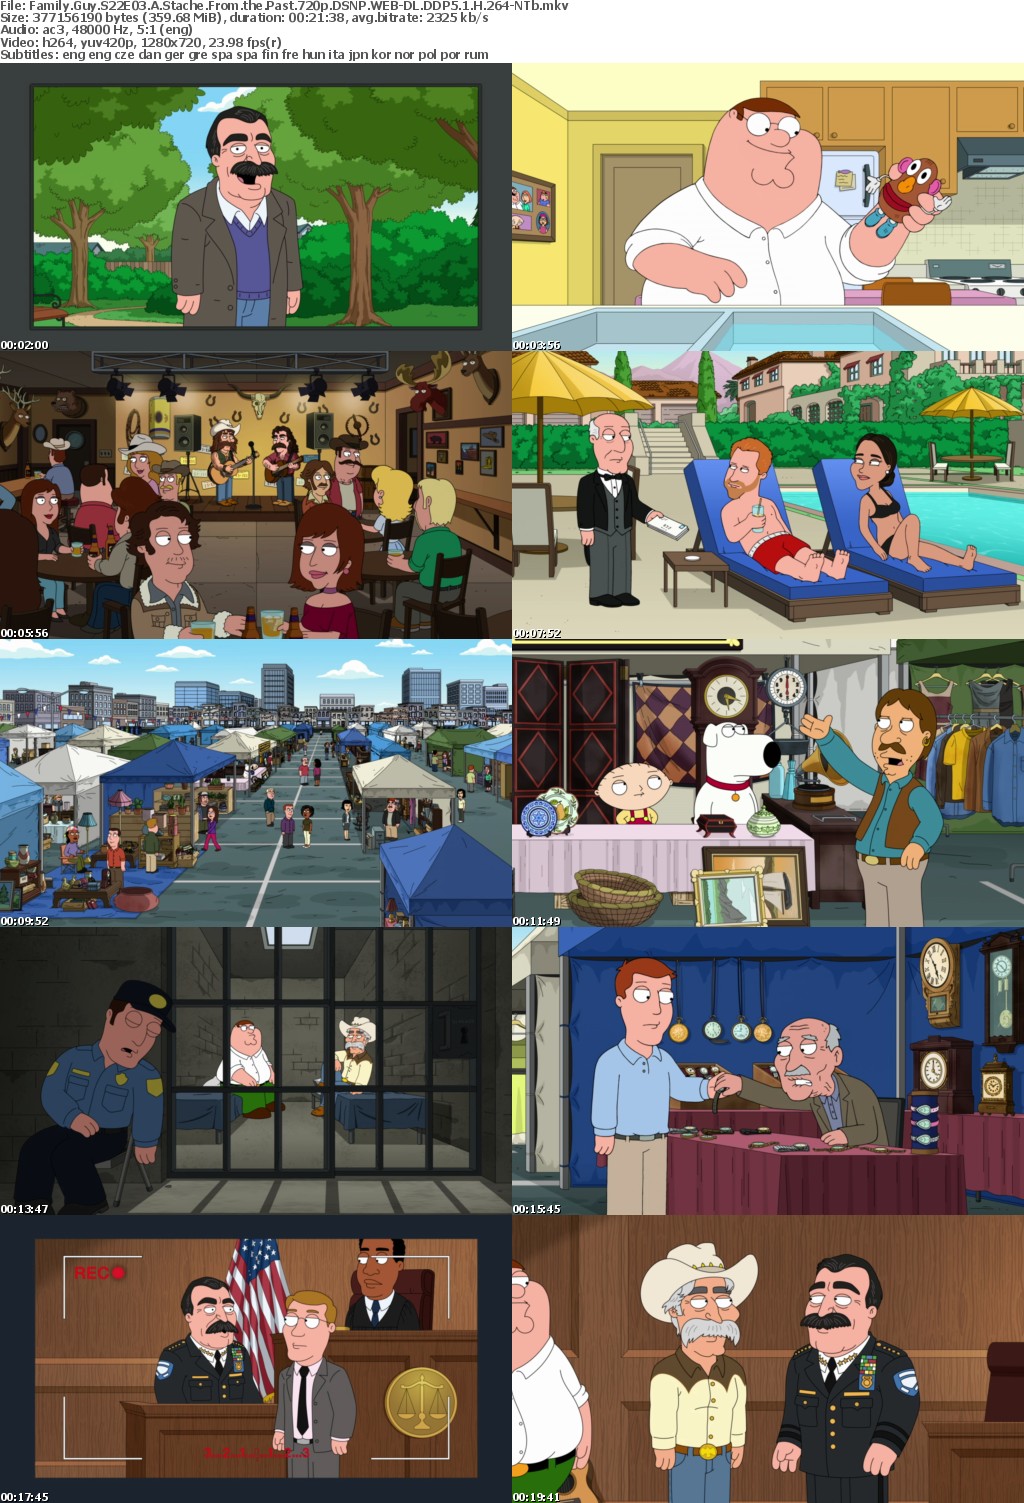 Family Guy S22E03 A Stache From the Past 720p DSNP WEB-DL DDP5 1 H 264-NTb